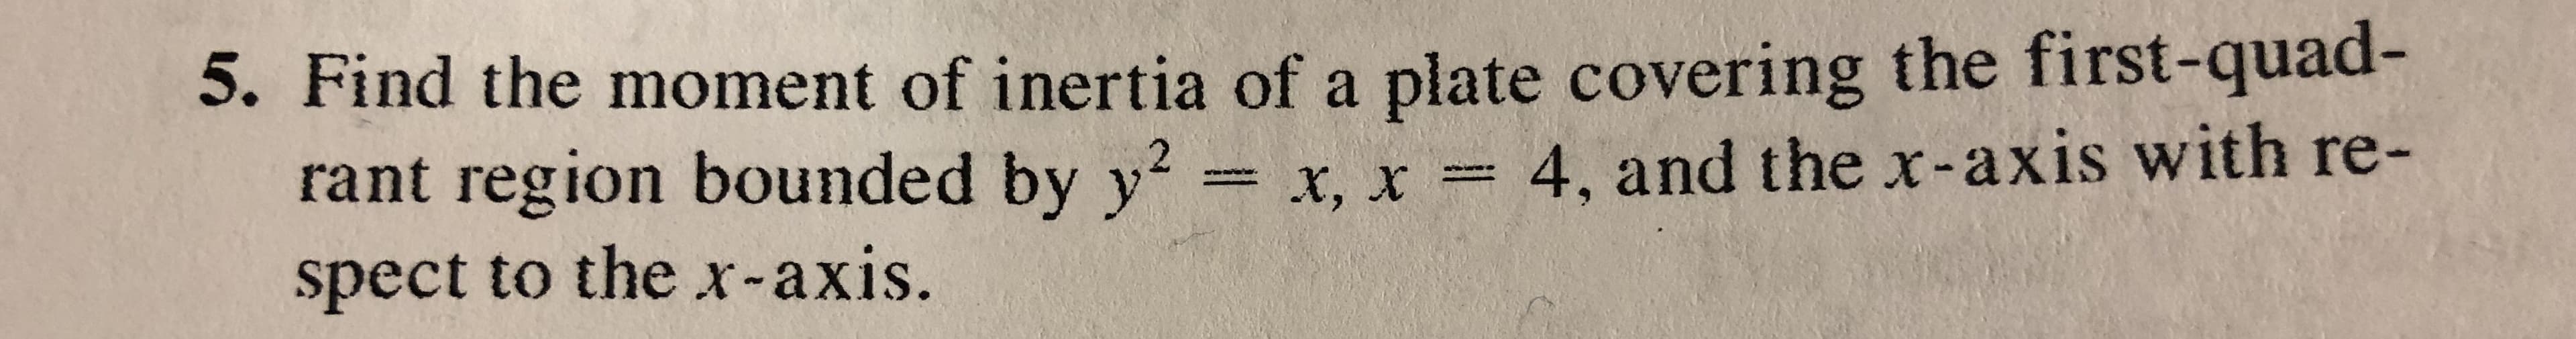 5. Find the moment of inertia of a plate covering the first-quad
rant region bounded by y2- x, x-: 4, and the x-axis with re-
spect to the x-axis.
